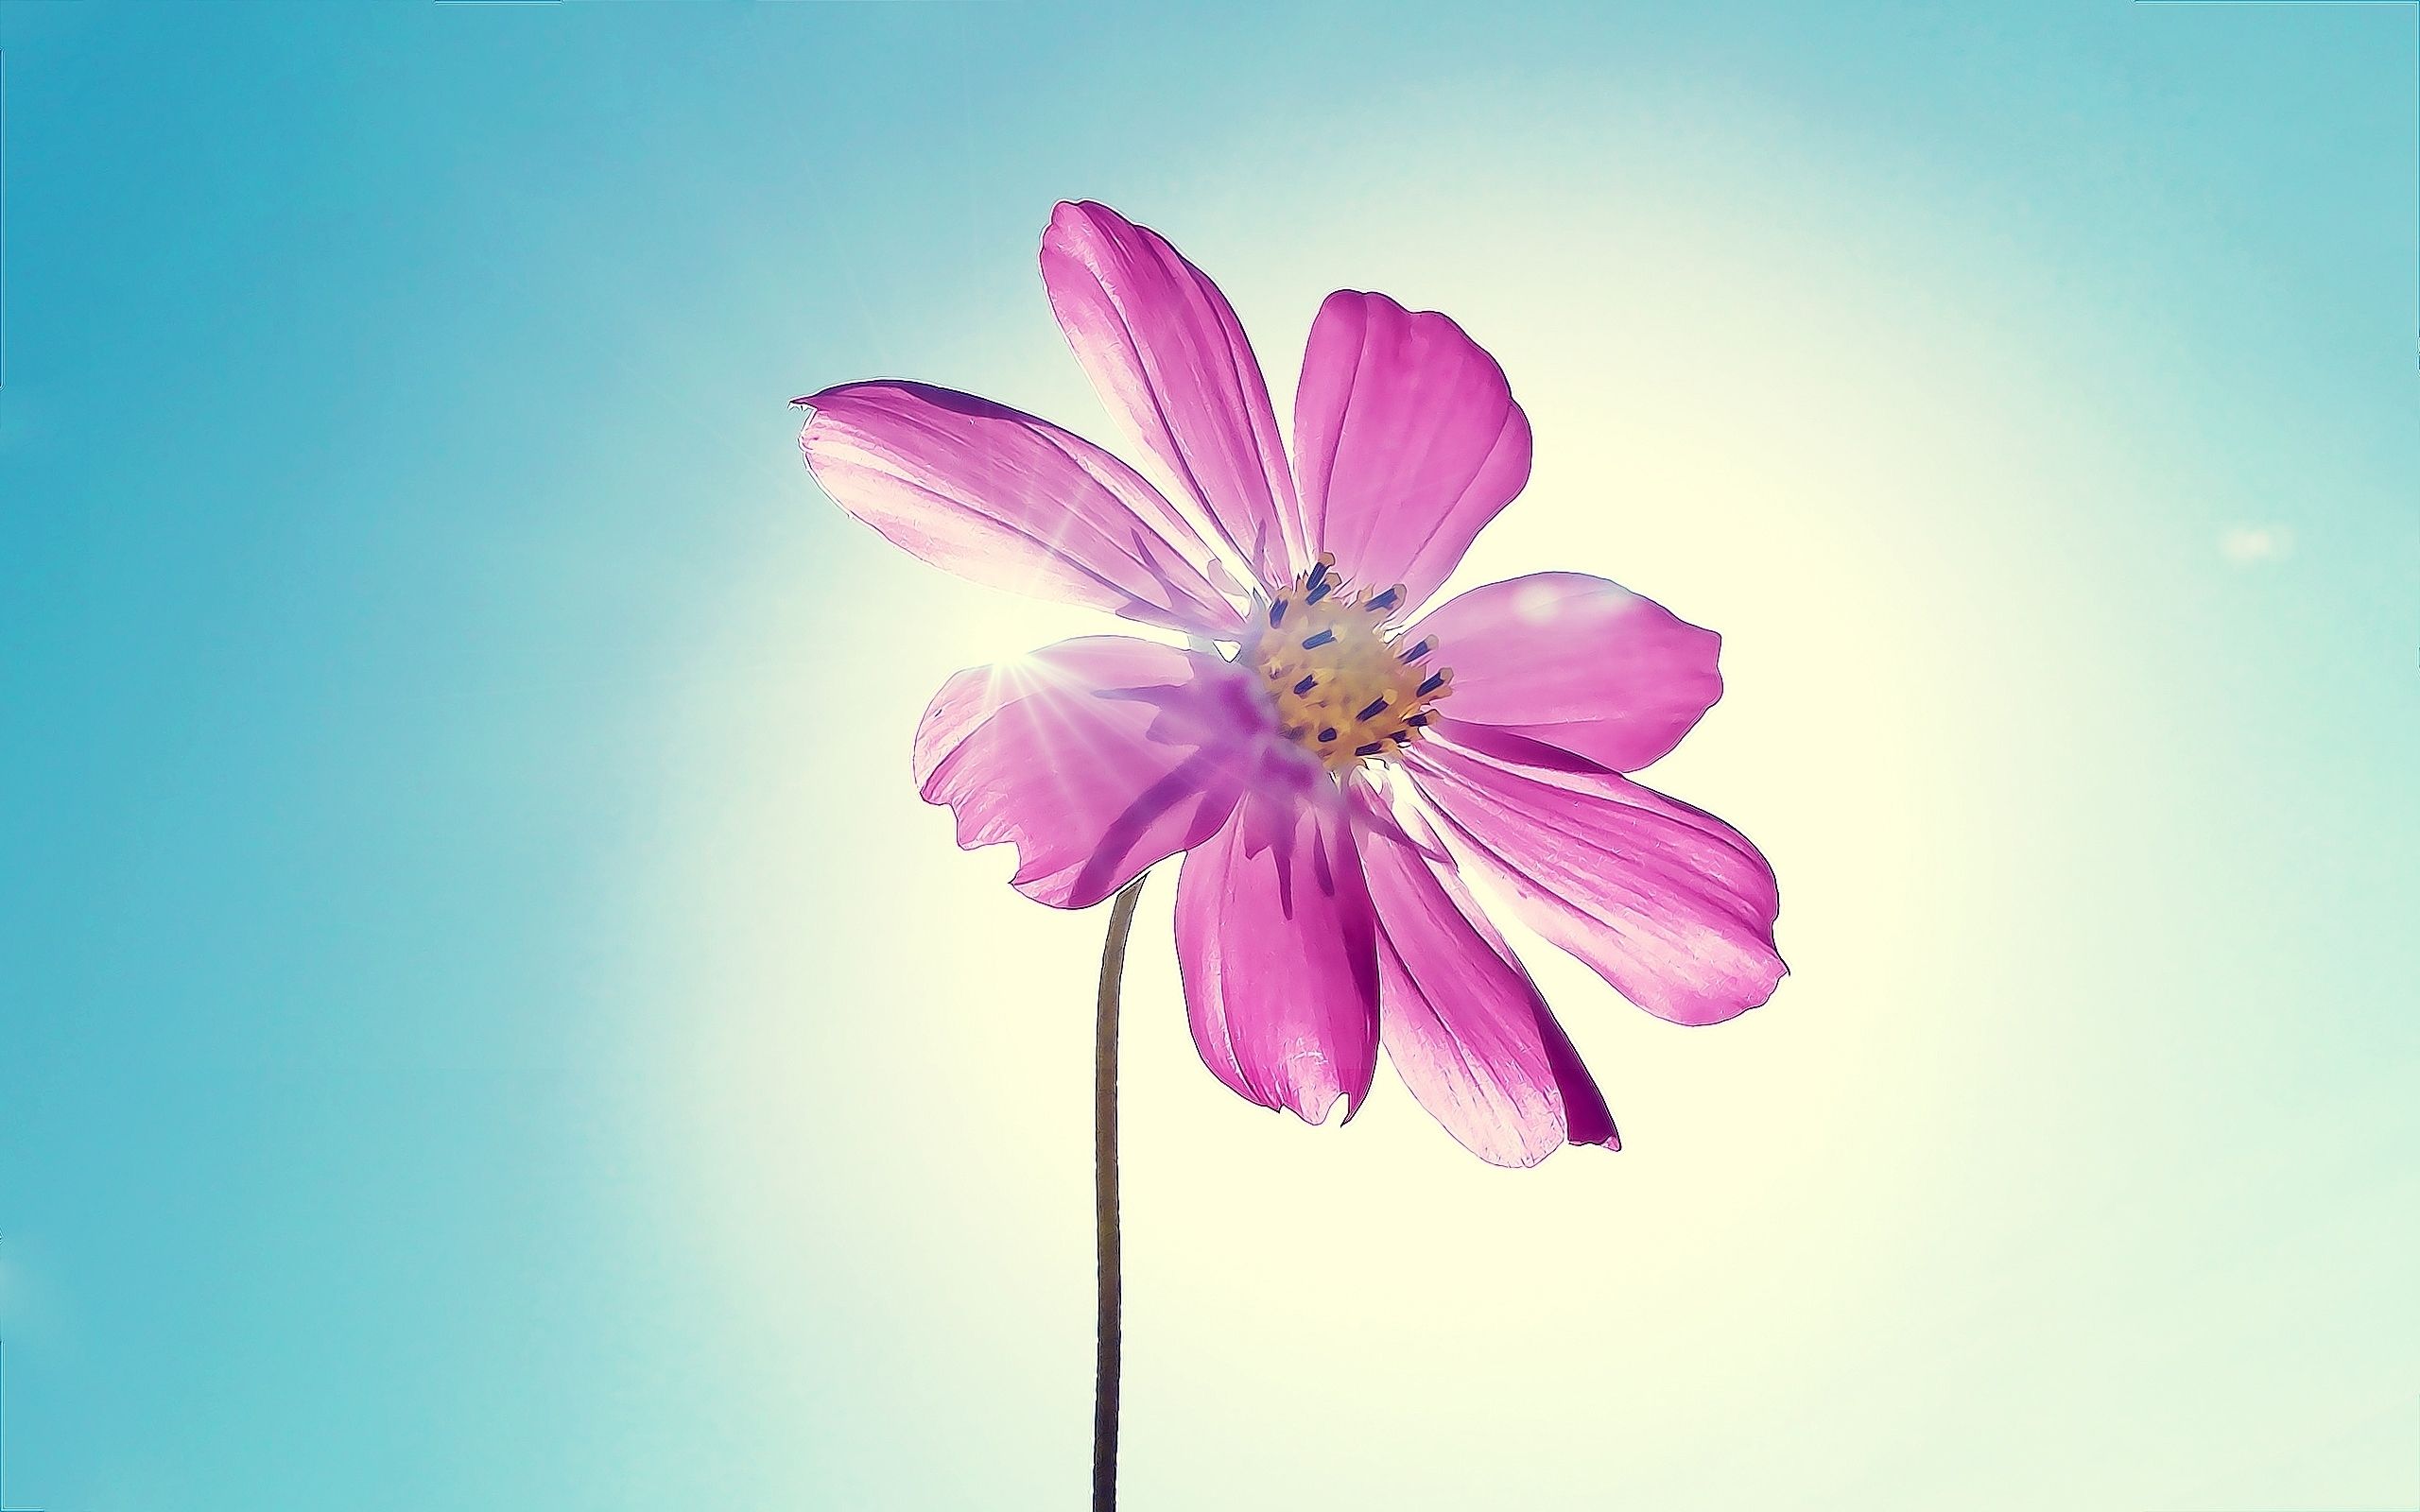 A pink flower with a blue sky in the background - Magenta